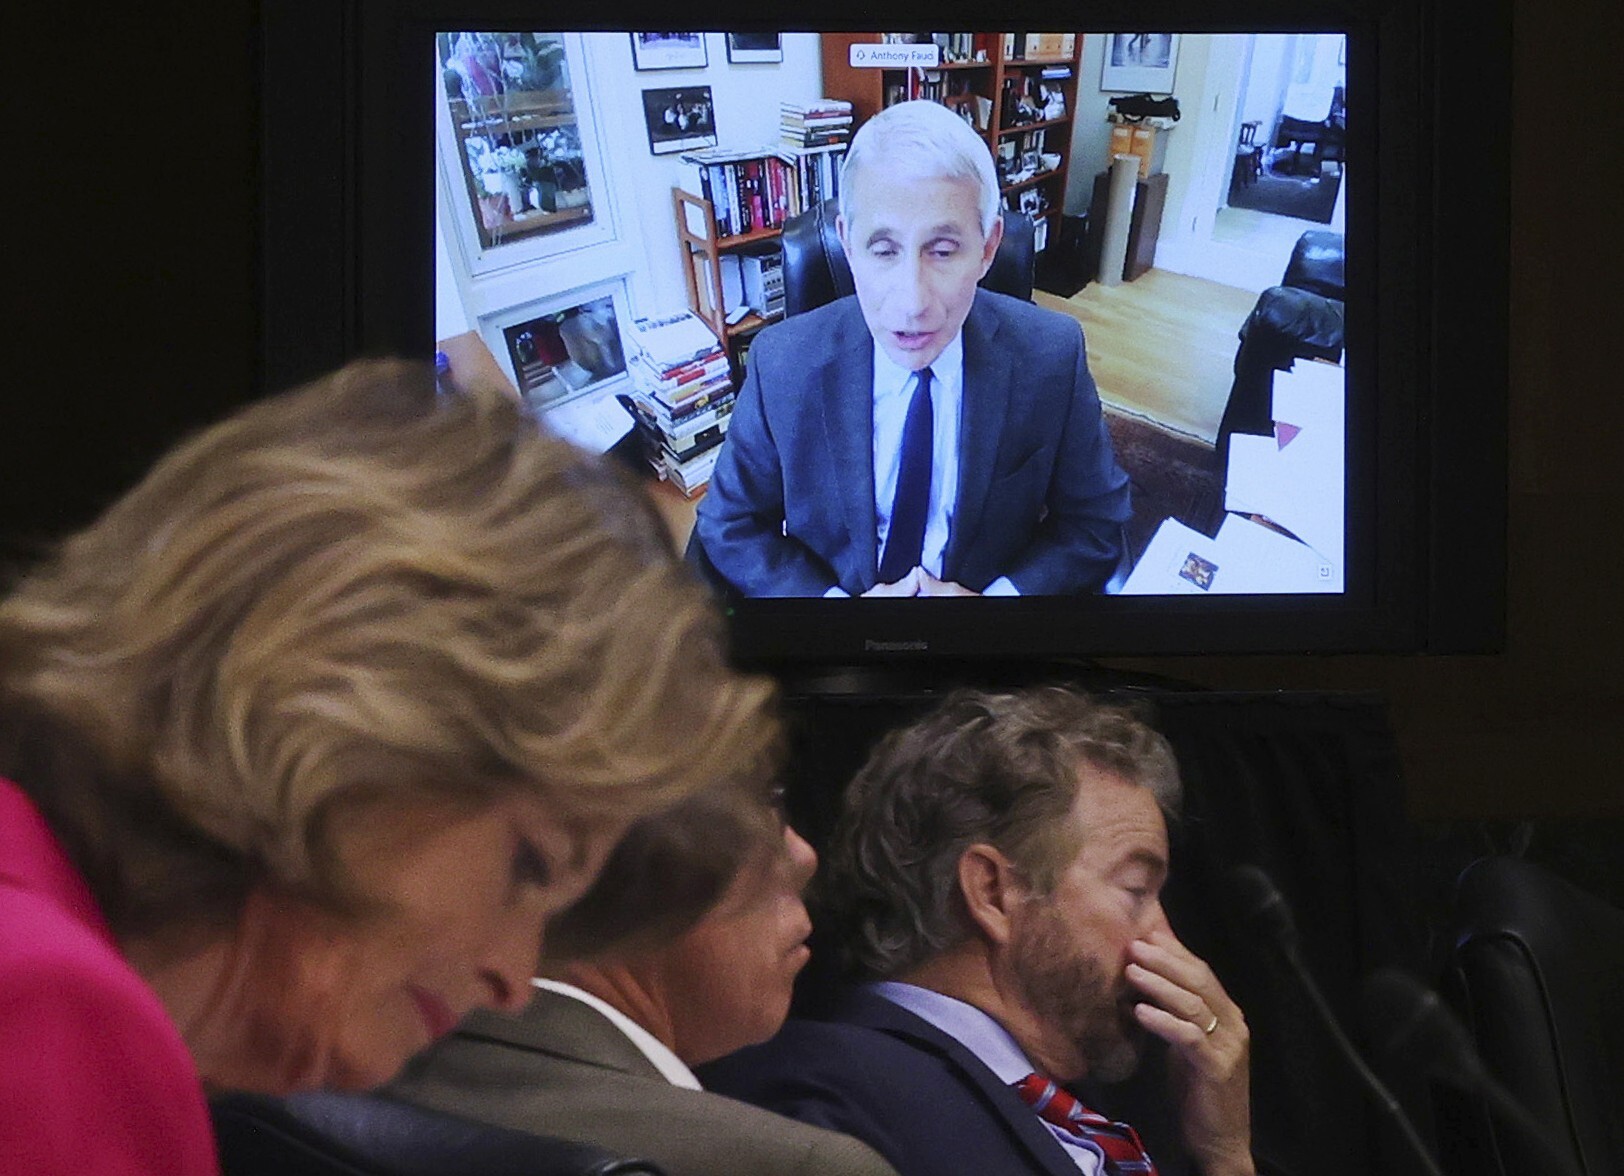 Senators listen as Dr Anthony Fauci speaks remotely during a virtual Senate committee hearing on Tuesday. Photo: AP